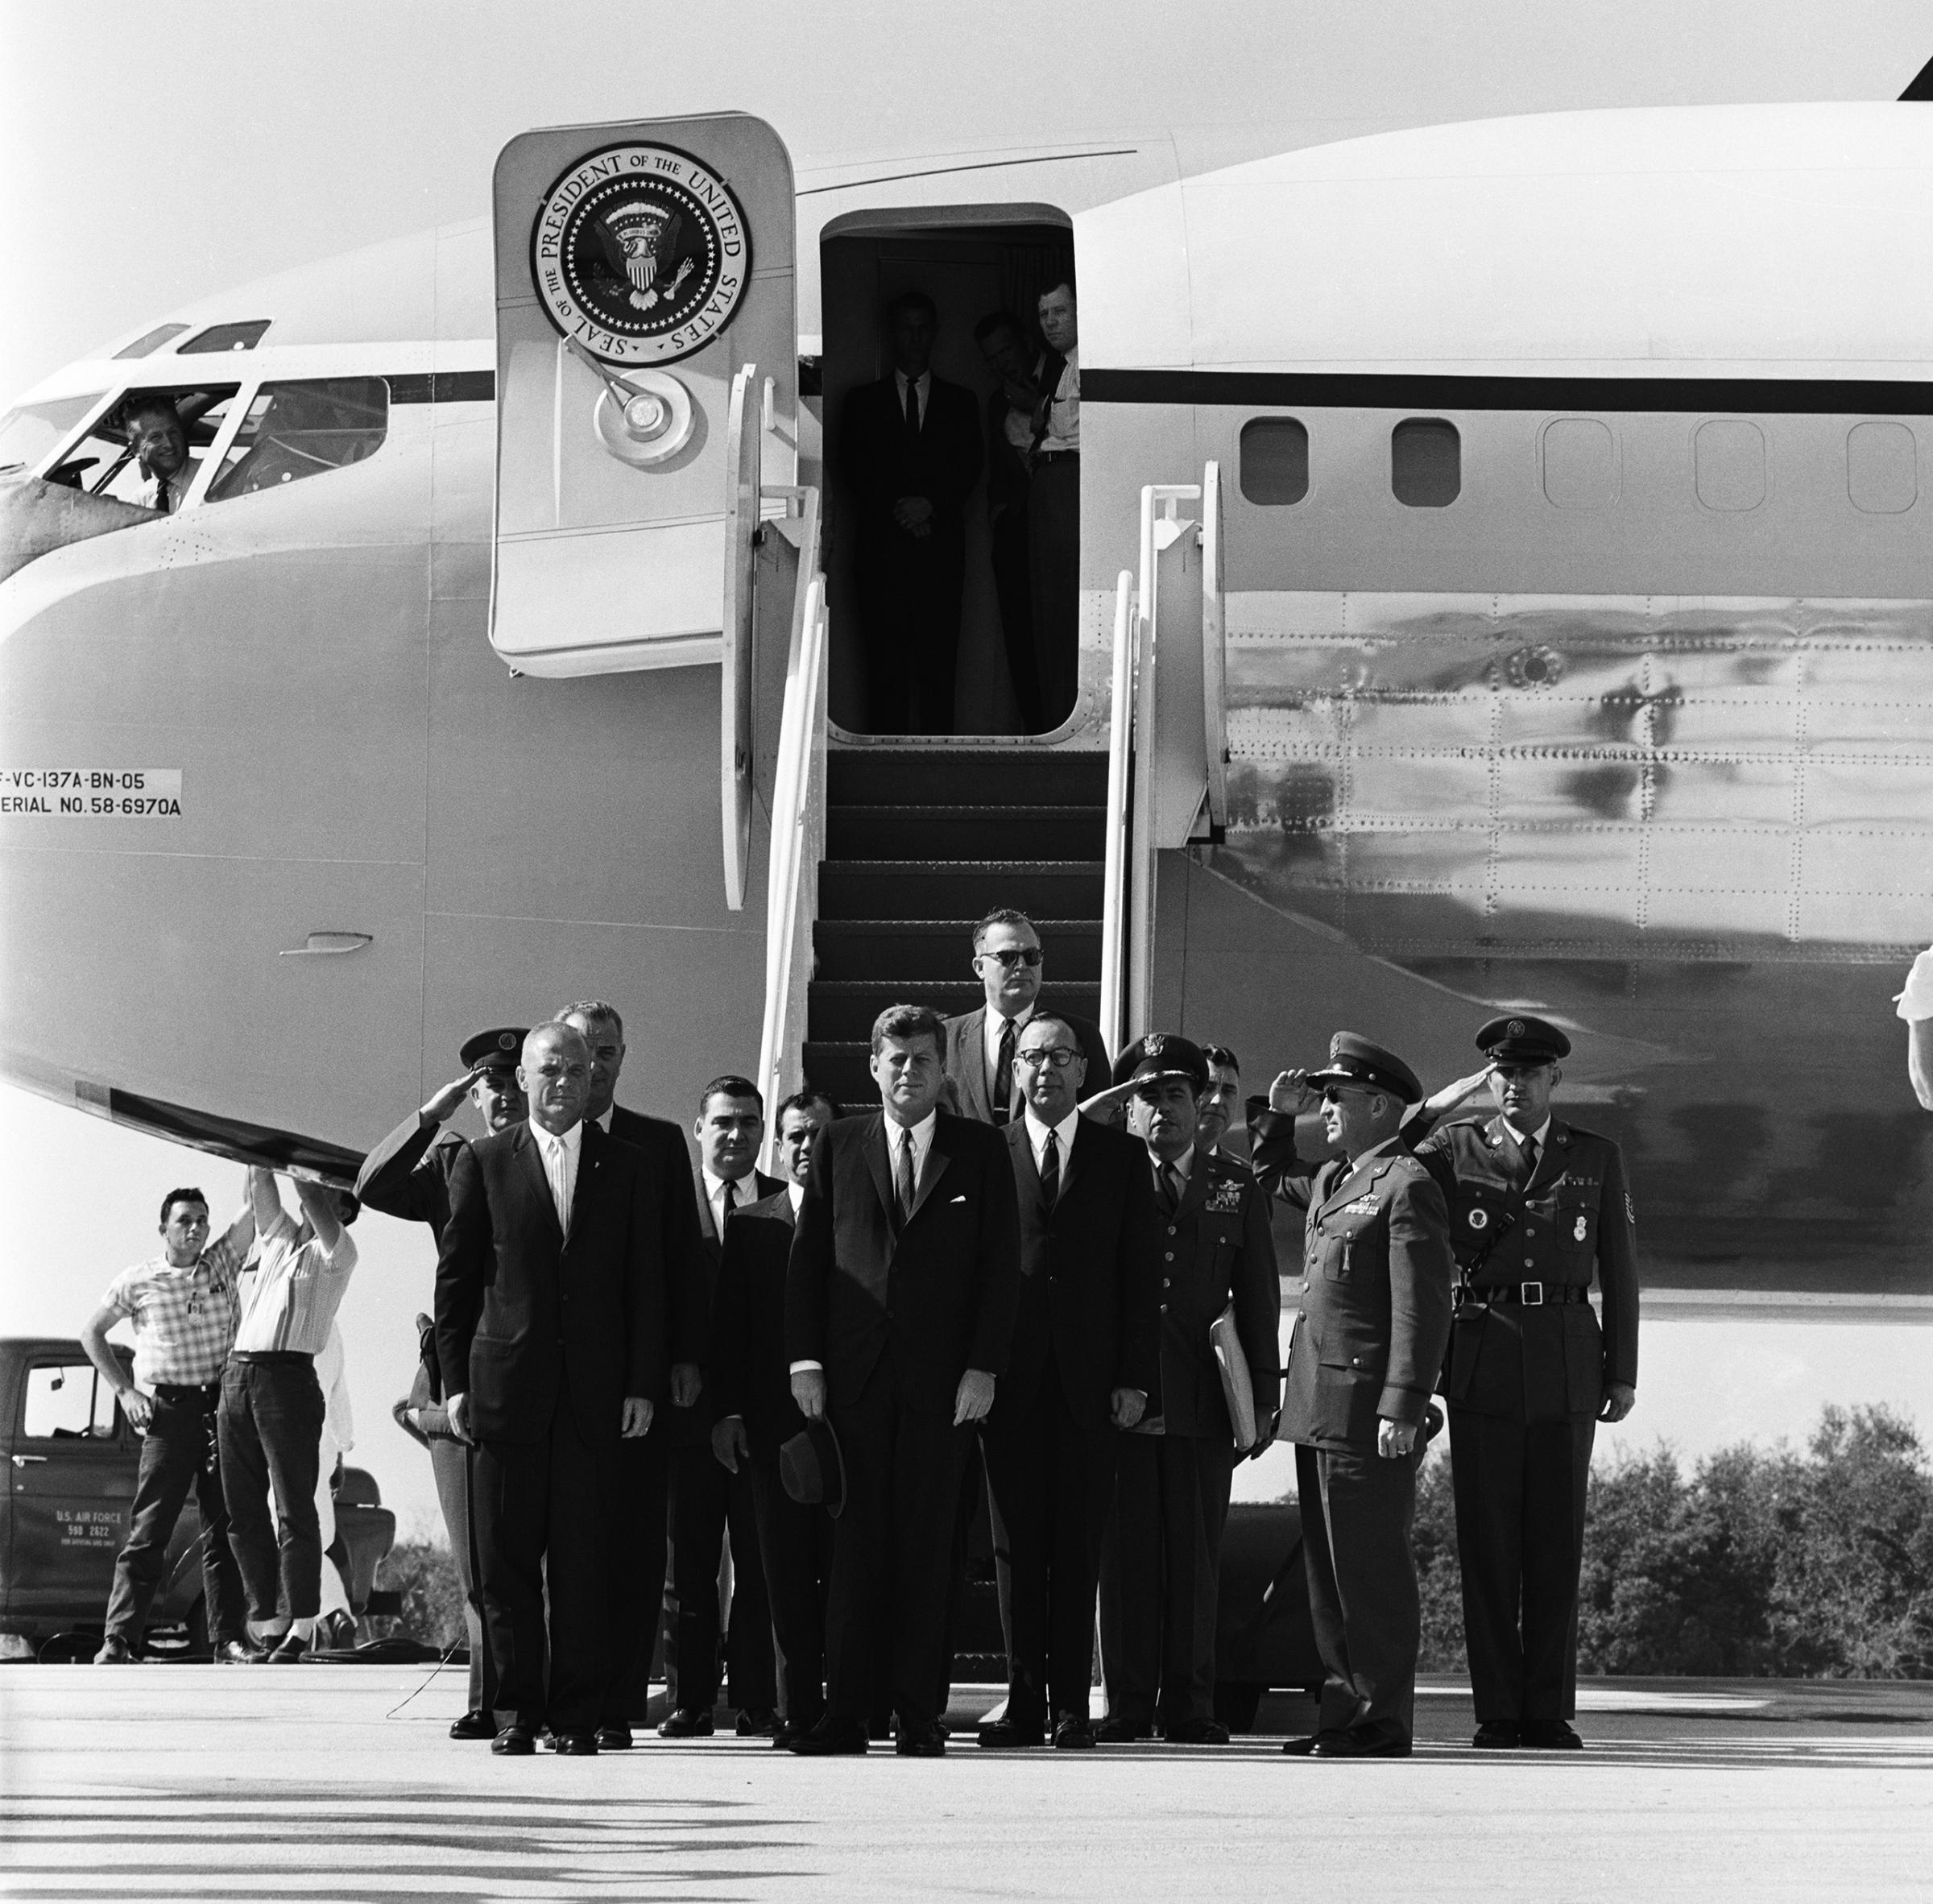 A Presidential Tribute On Feb. 23, 1962, three days after the successful mission, President Kennedy and Vice President Johnson visit Cape Canaveral, Fla., to present Glenn with NASA's Distinguished Service Medal. (Johnson is visible just behind Glenn at left.)